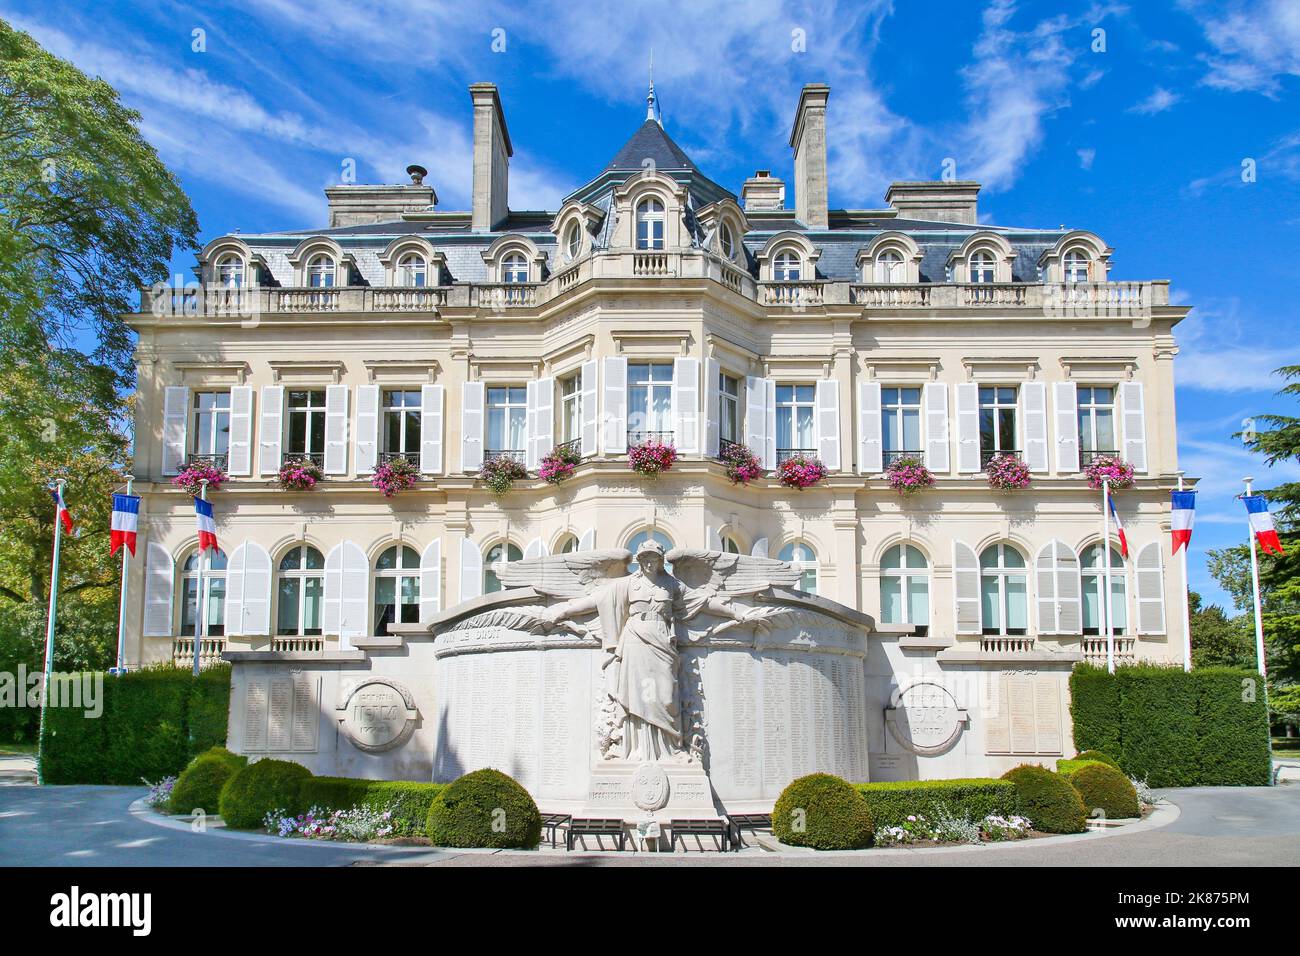 The Hotel de Ville, Epernay, centre of Champagne production, Marne, France, Europe Stock Photo